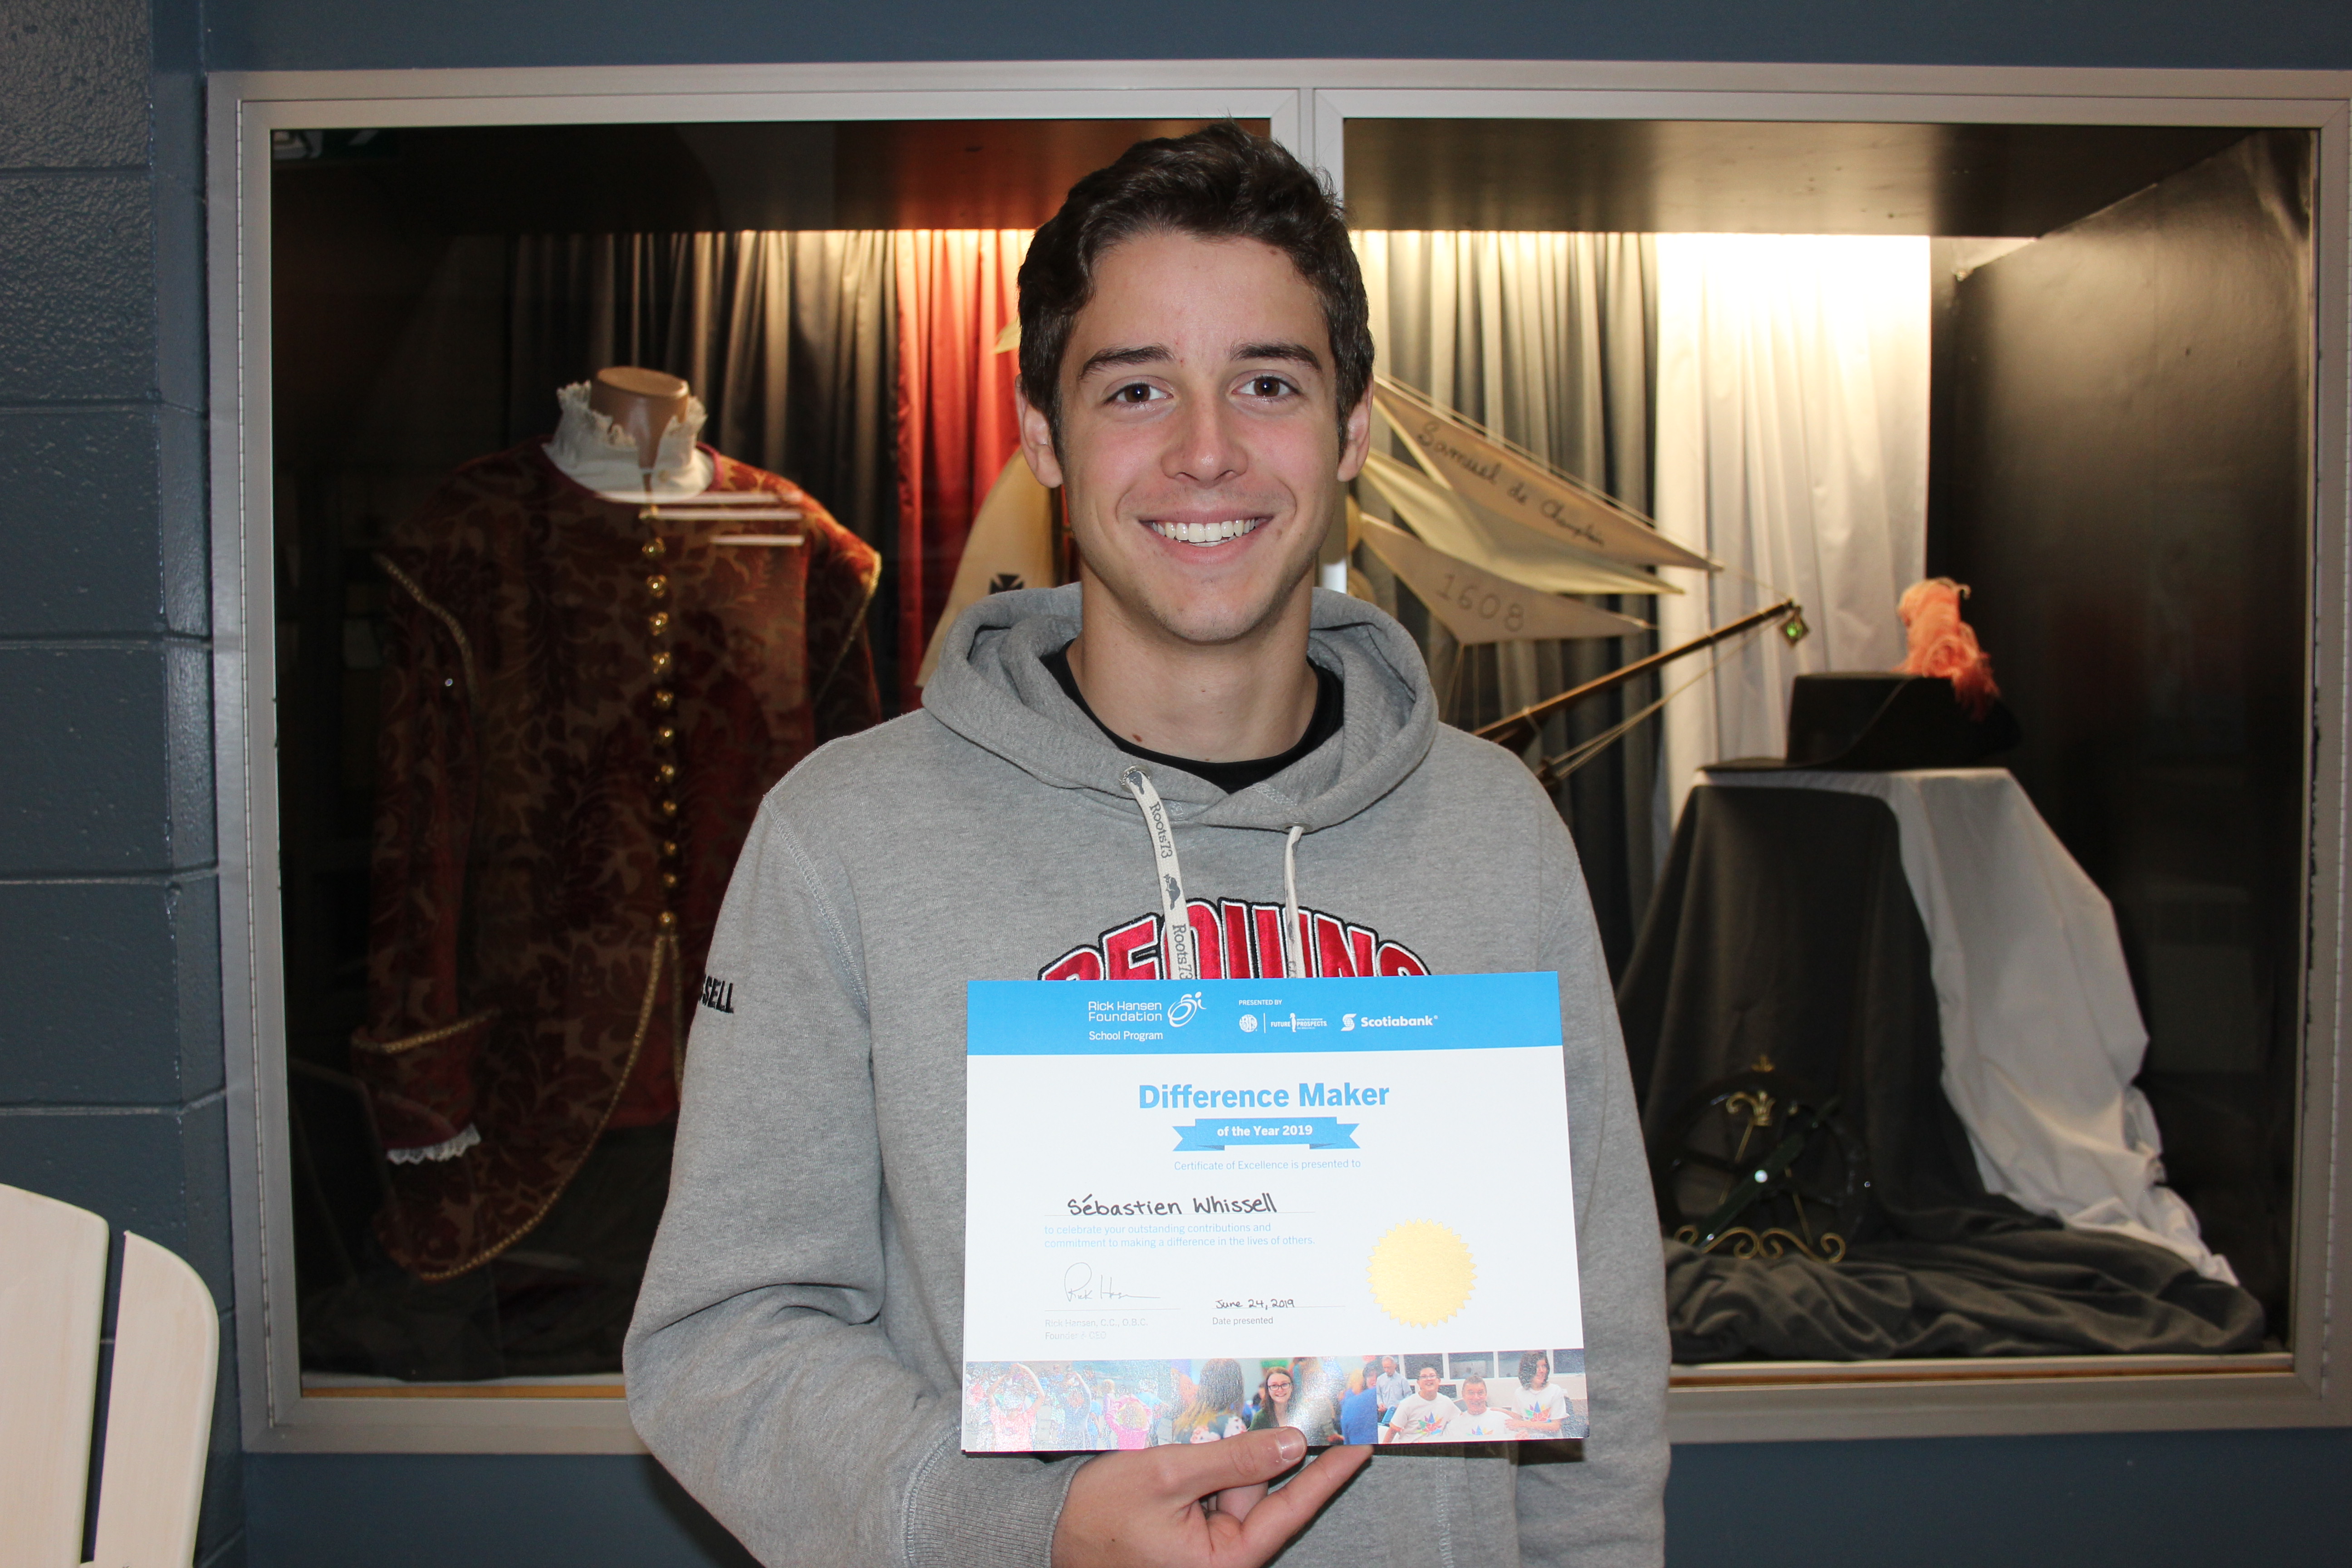 Young brown with brown hair, wearing sweater smiles holding up DM year certificate. 